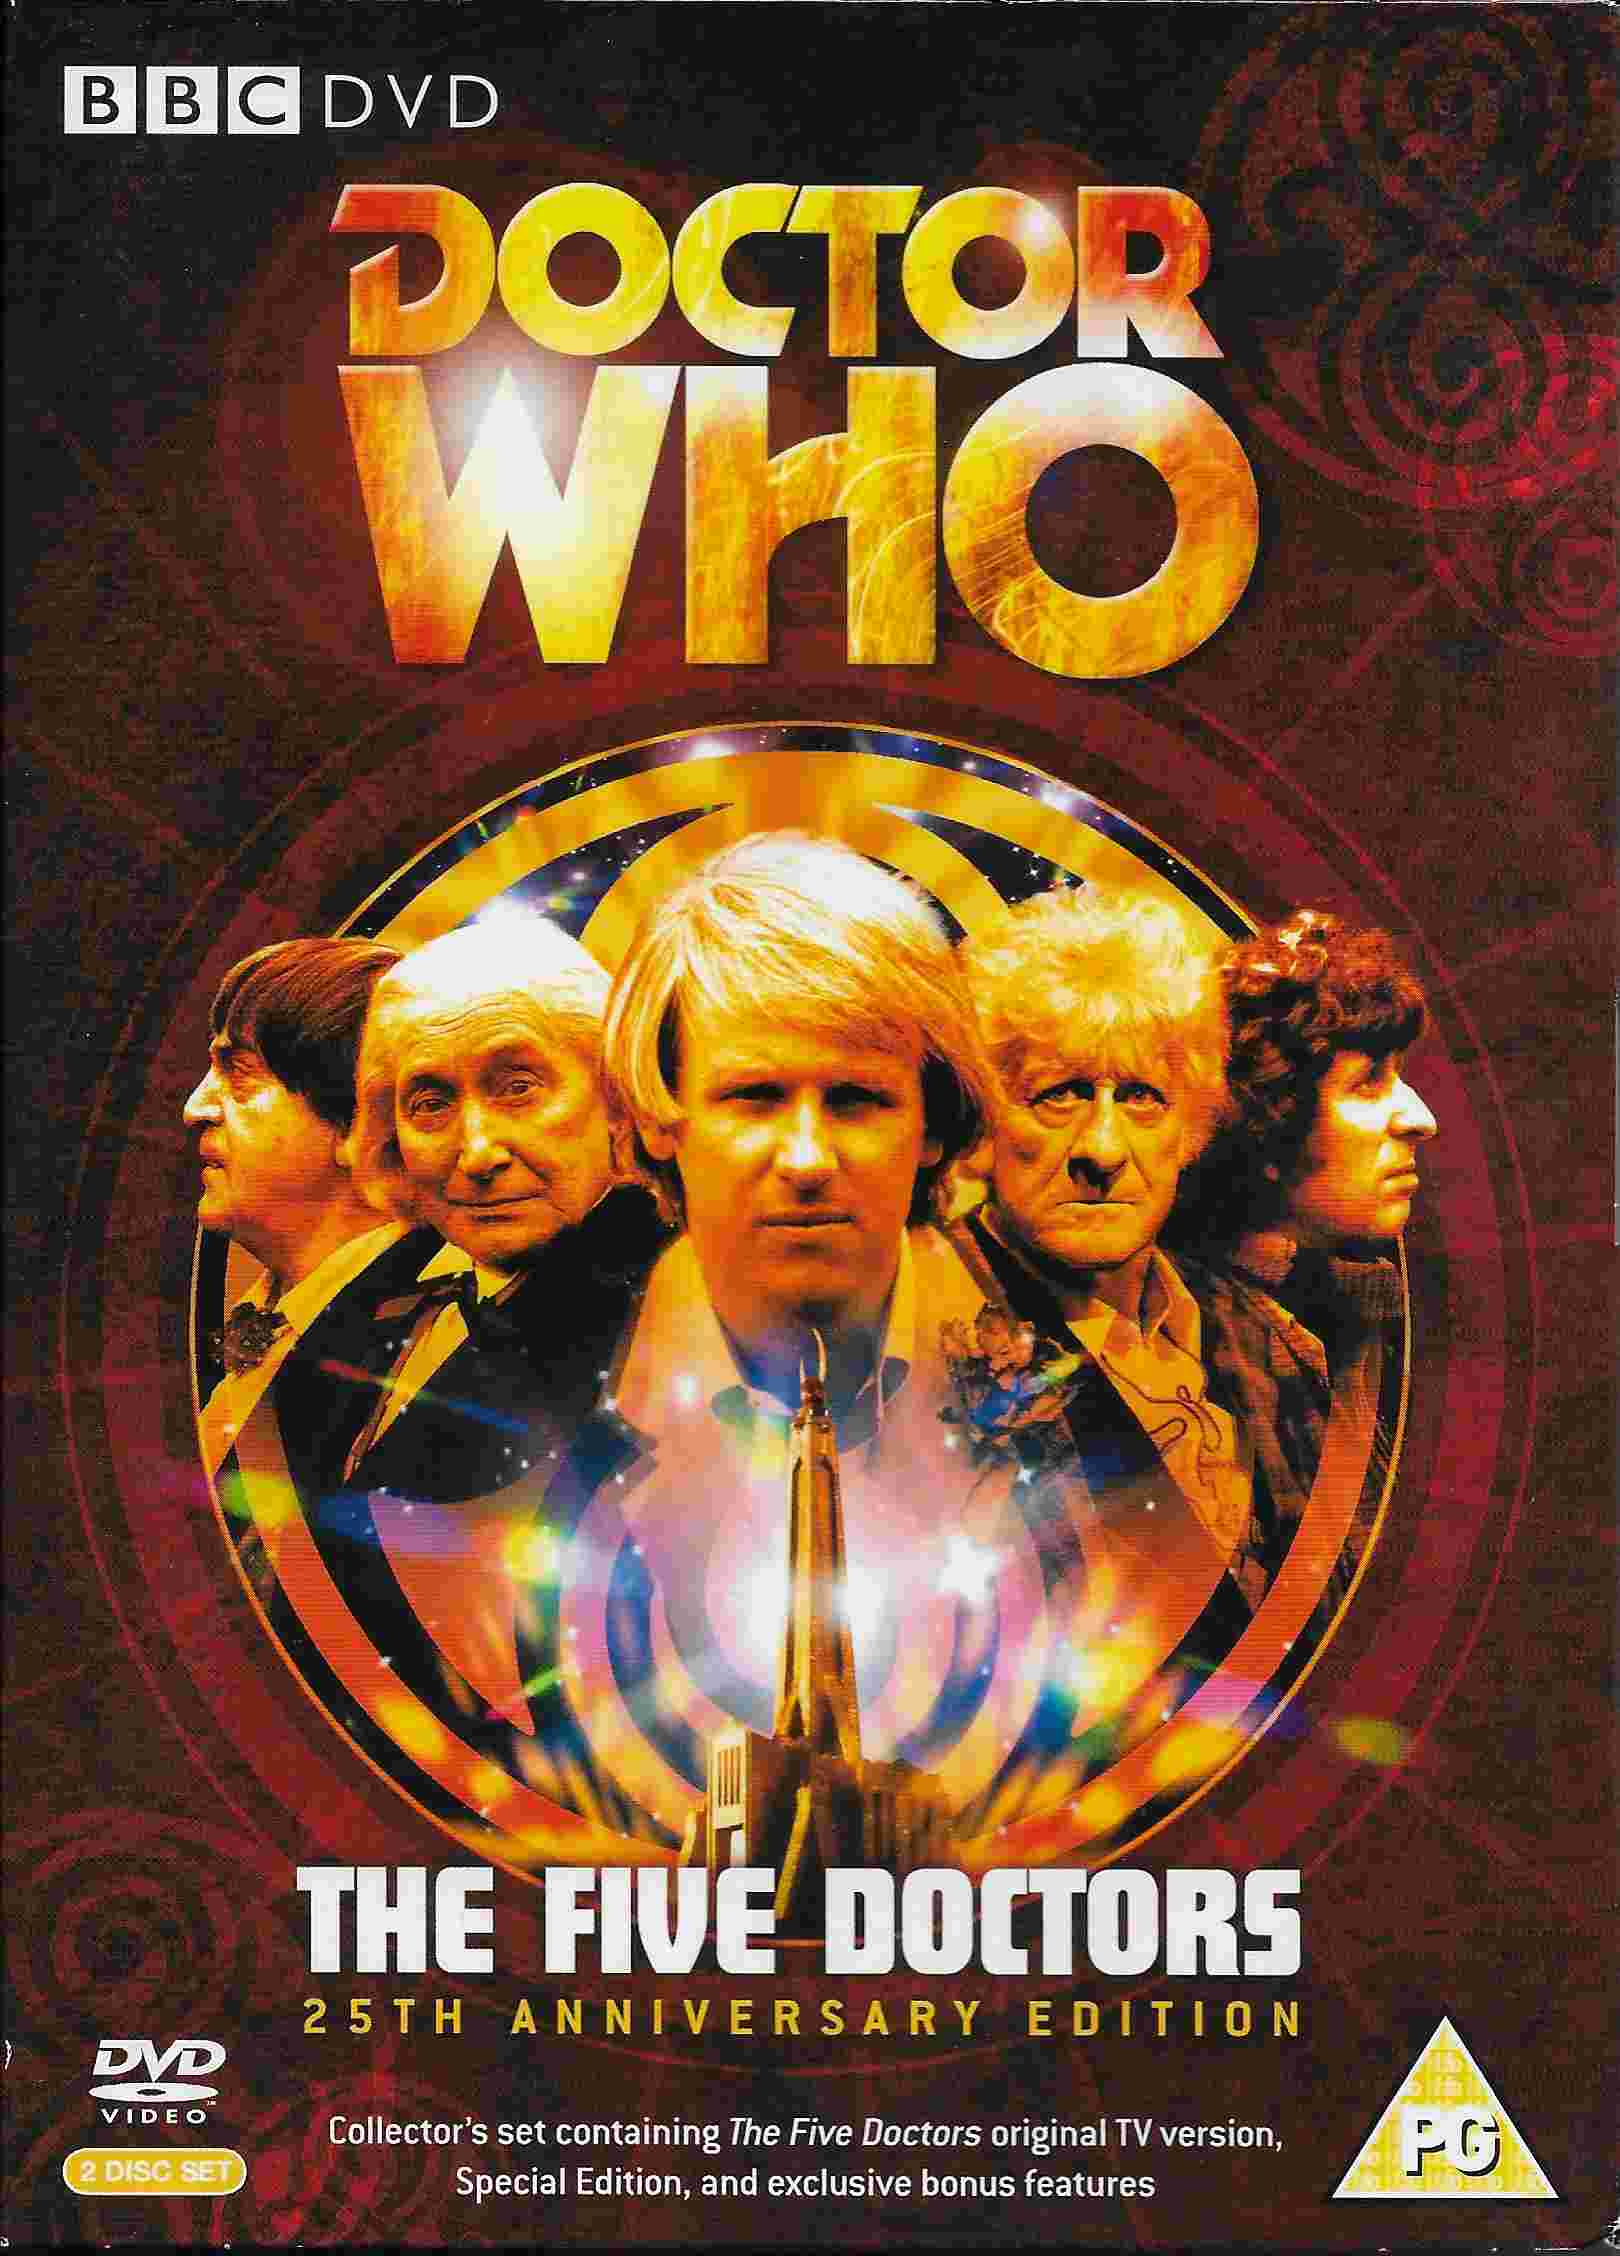 Picture of BBCDVD 2450 Doctor Who - The five Doctors by artist Terrance Dicks from the BBC dvds - Records and Tapes library